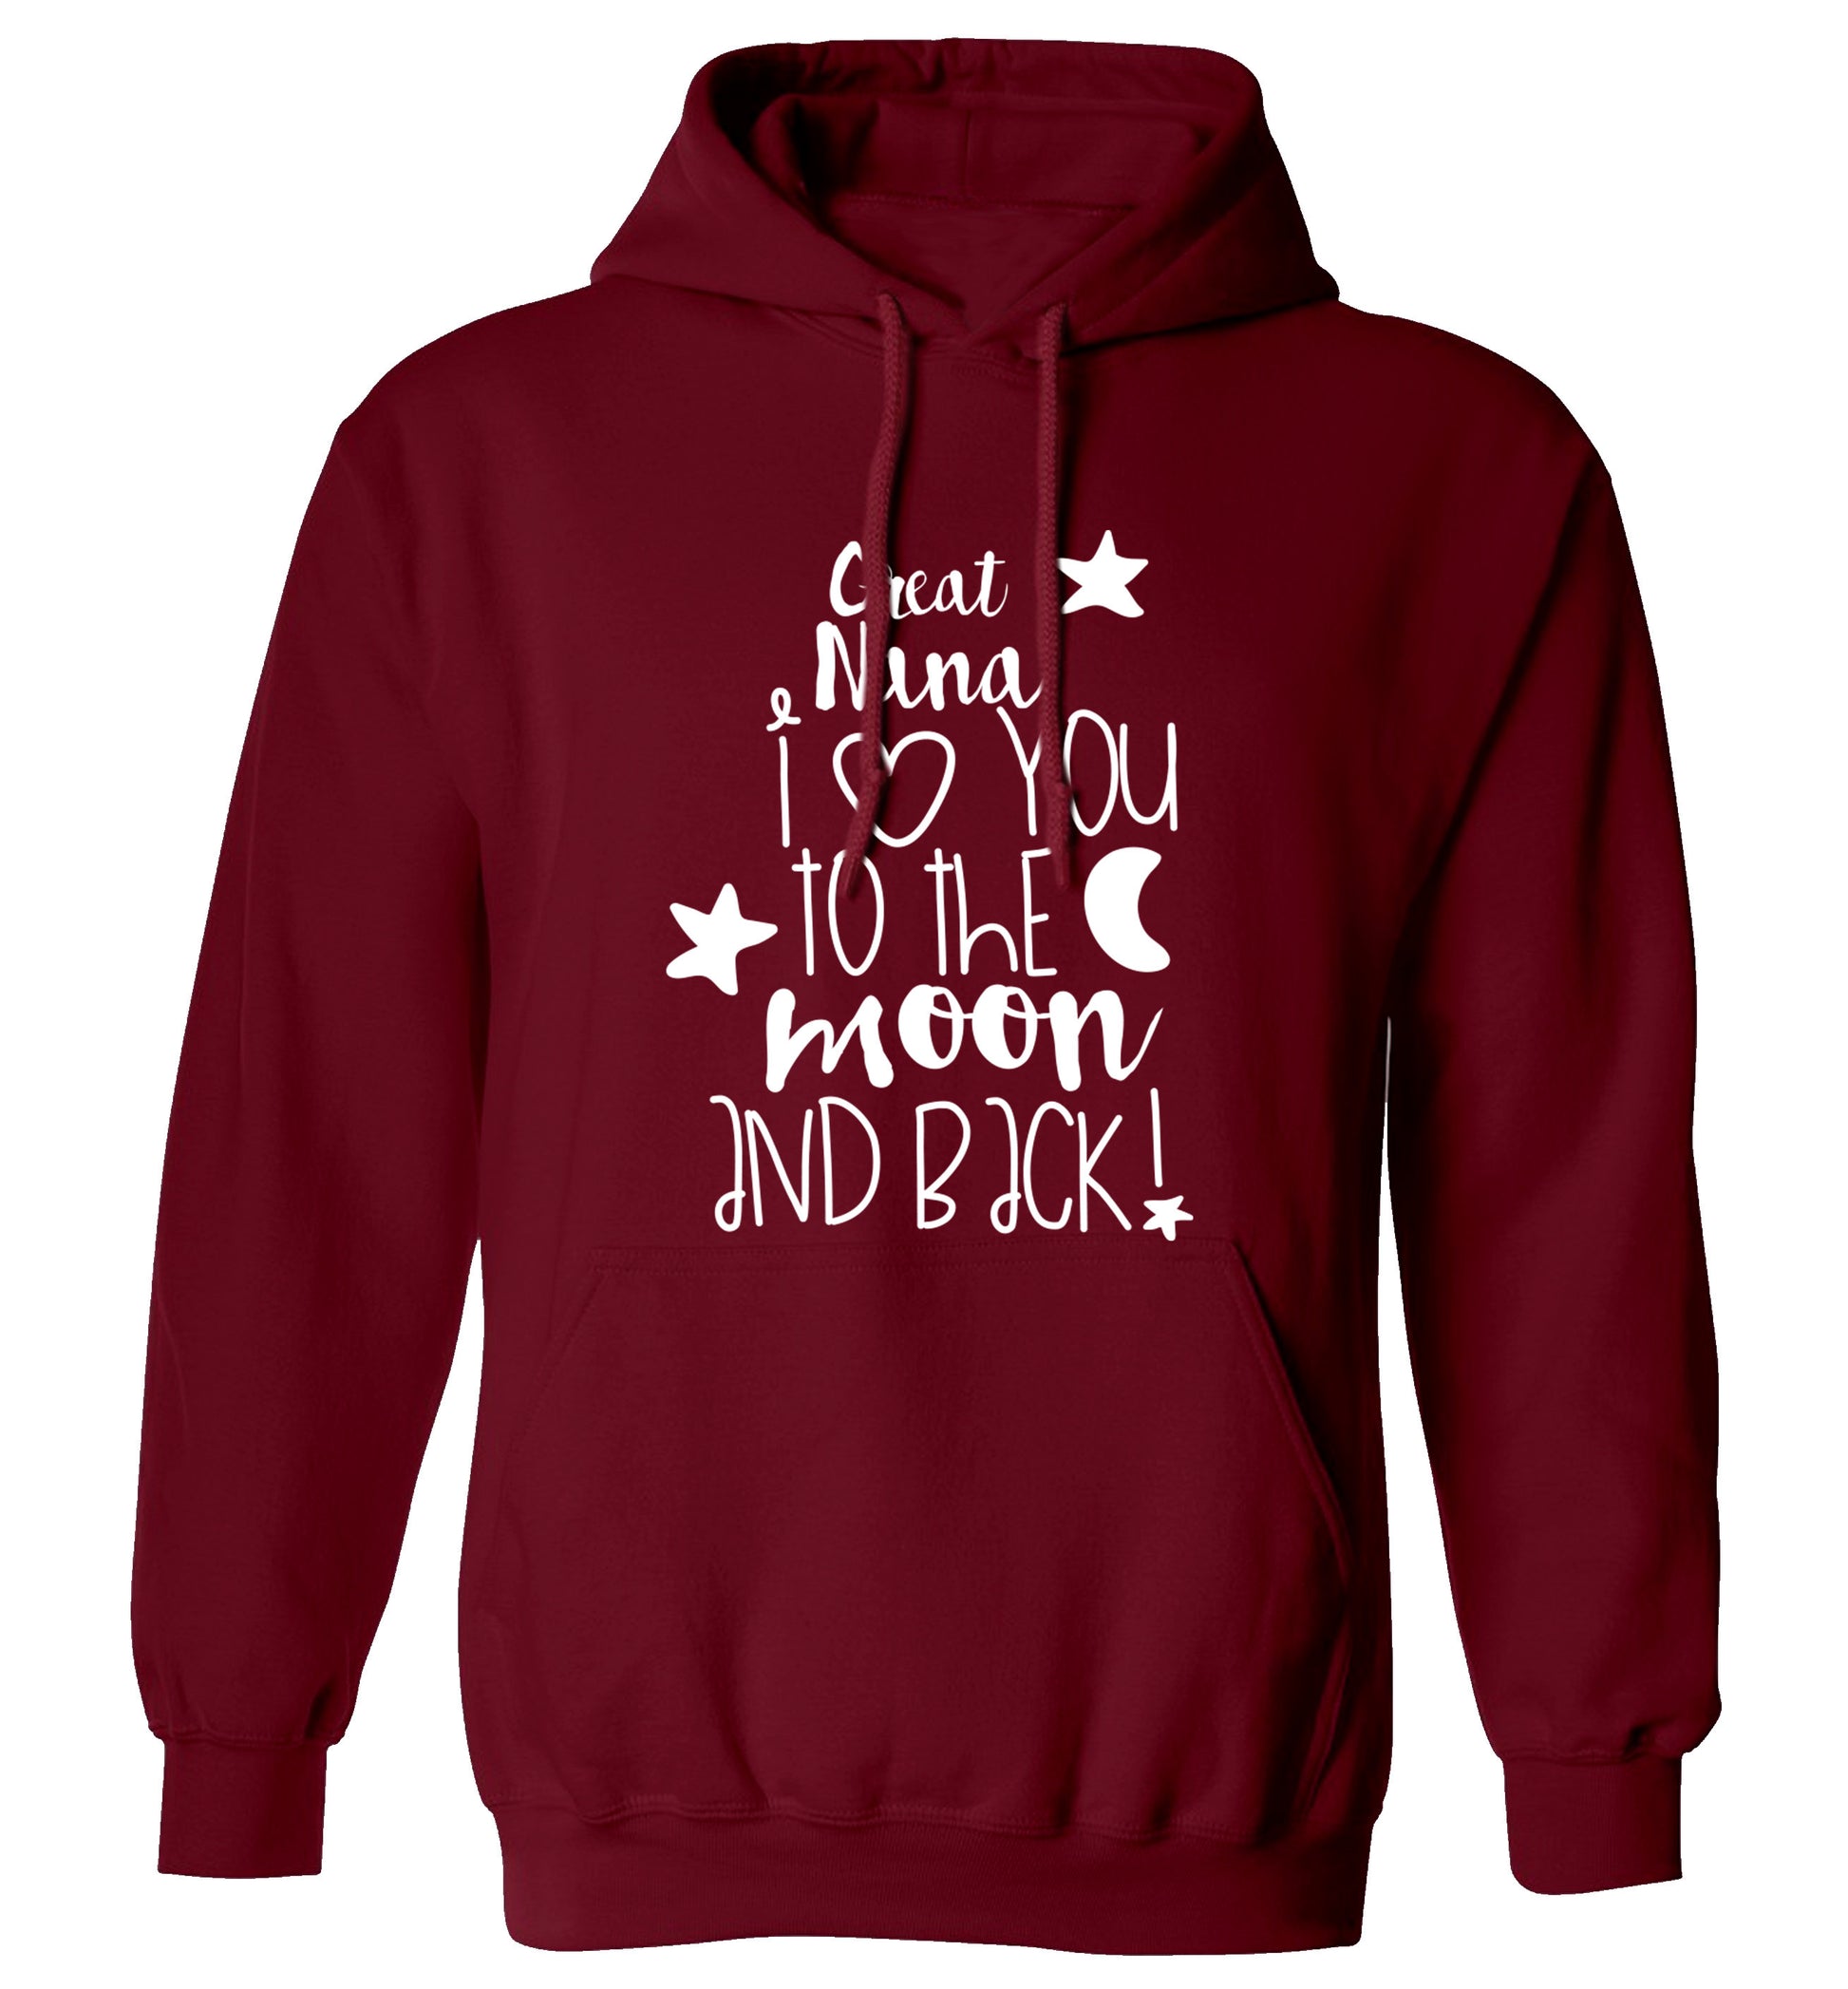 Great Nana I love you to the moon and back adults unisex maroon hoodie 2XL